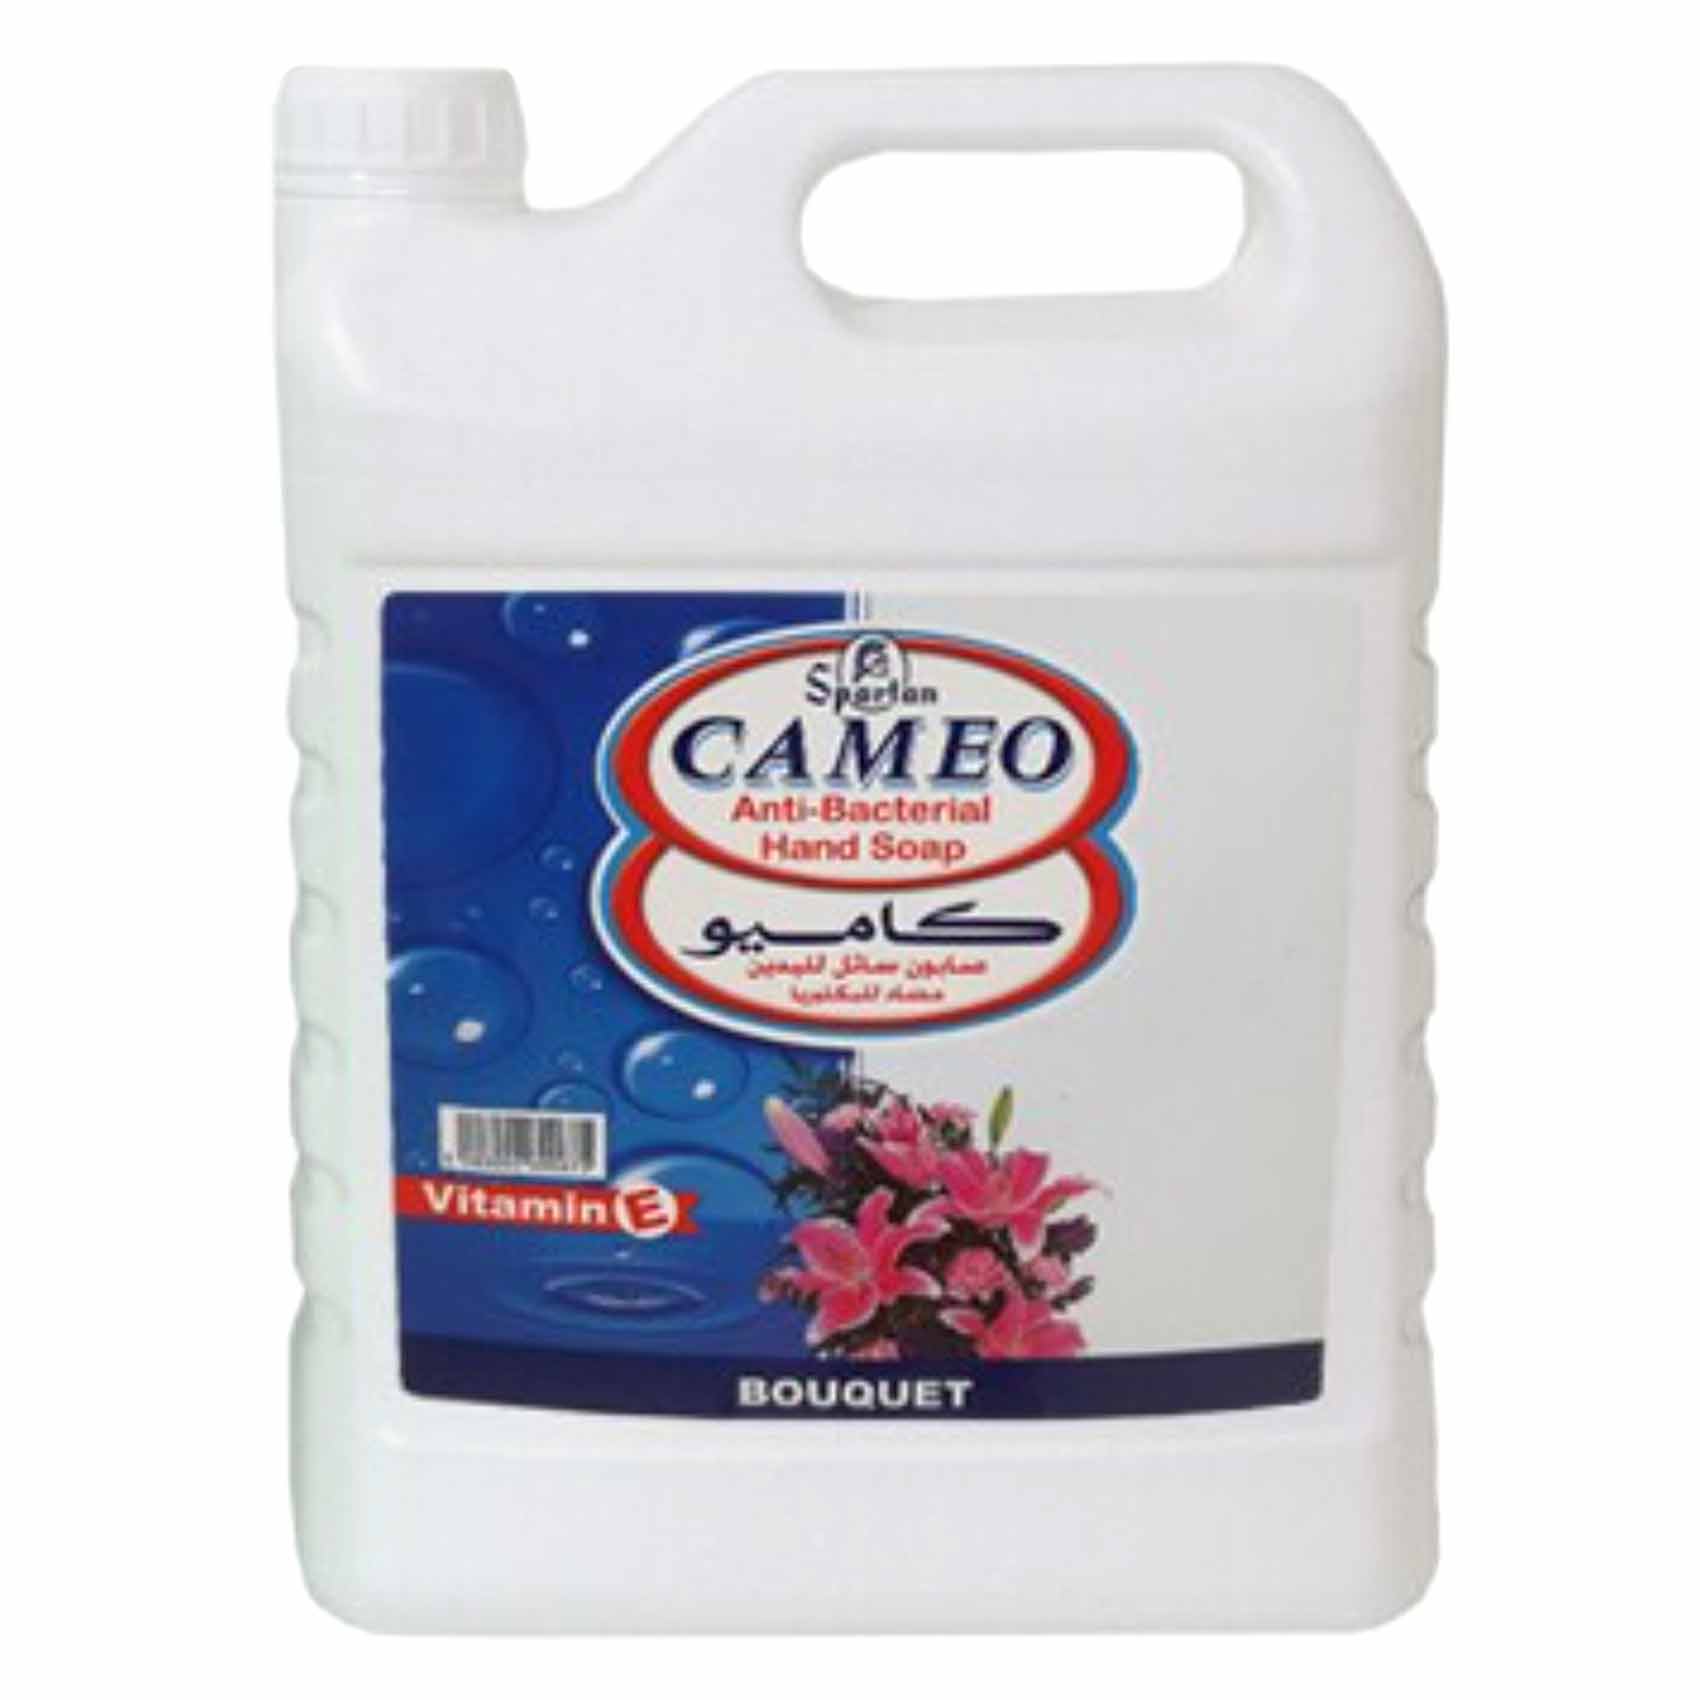 Cameo Anti-Bacterial Bouquet Hand Soap 4L